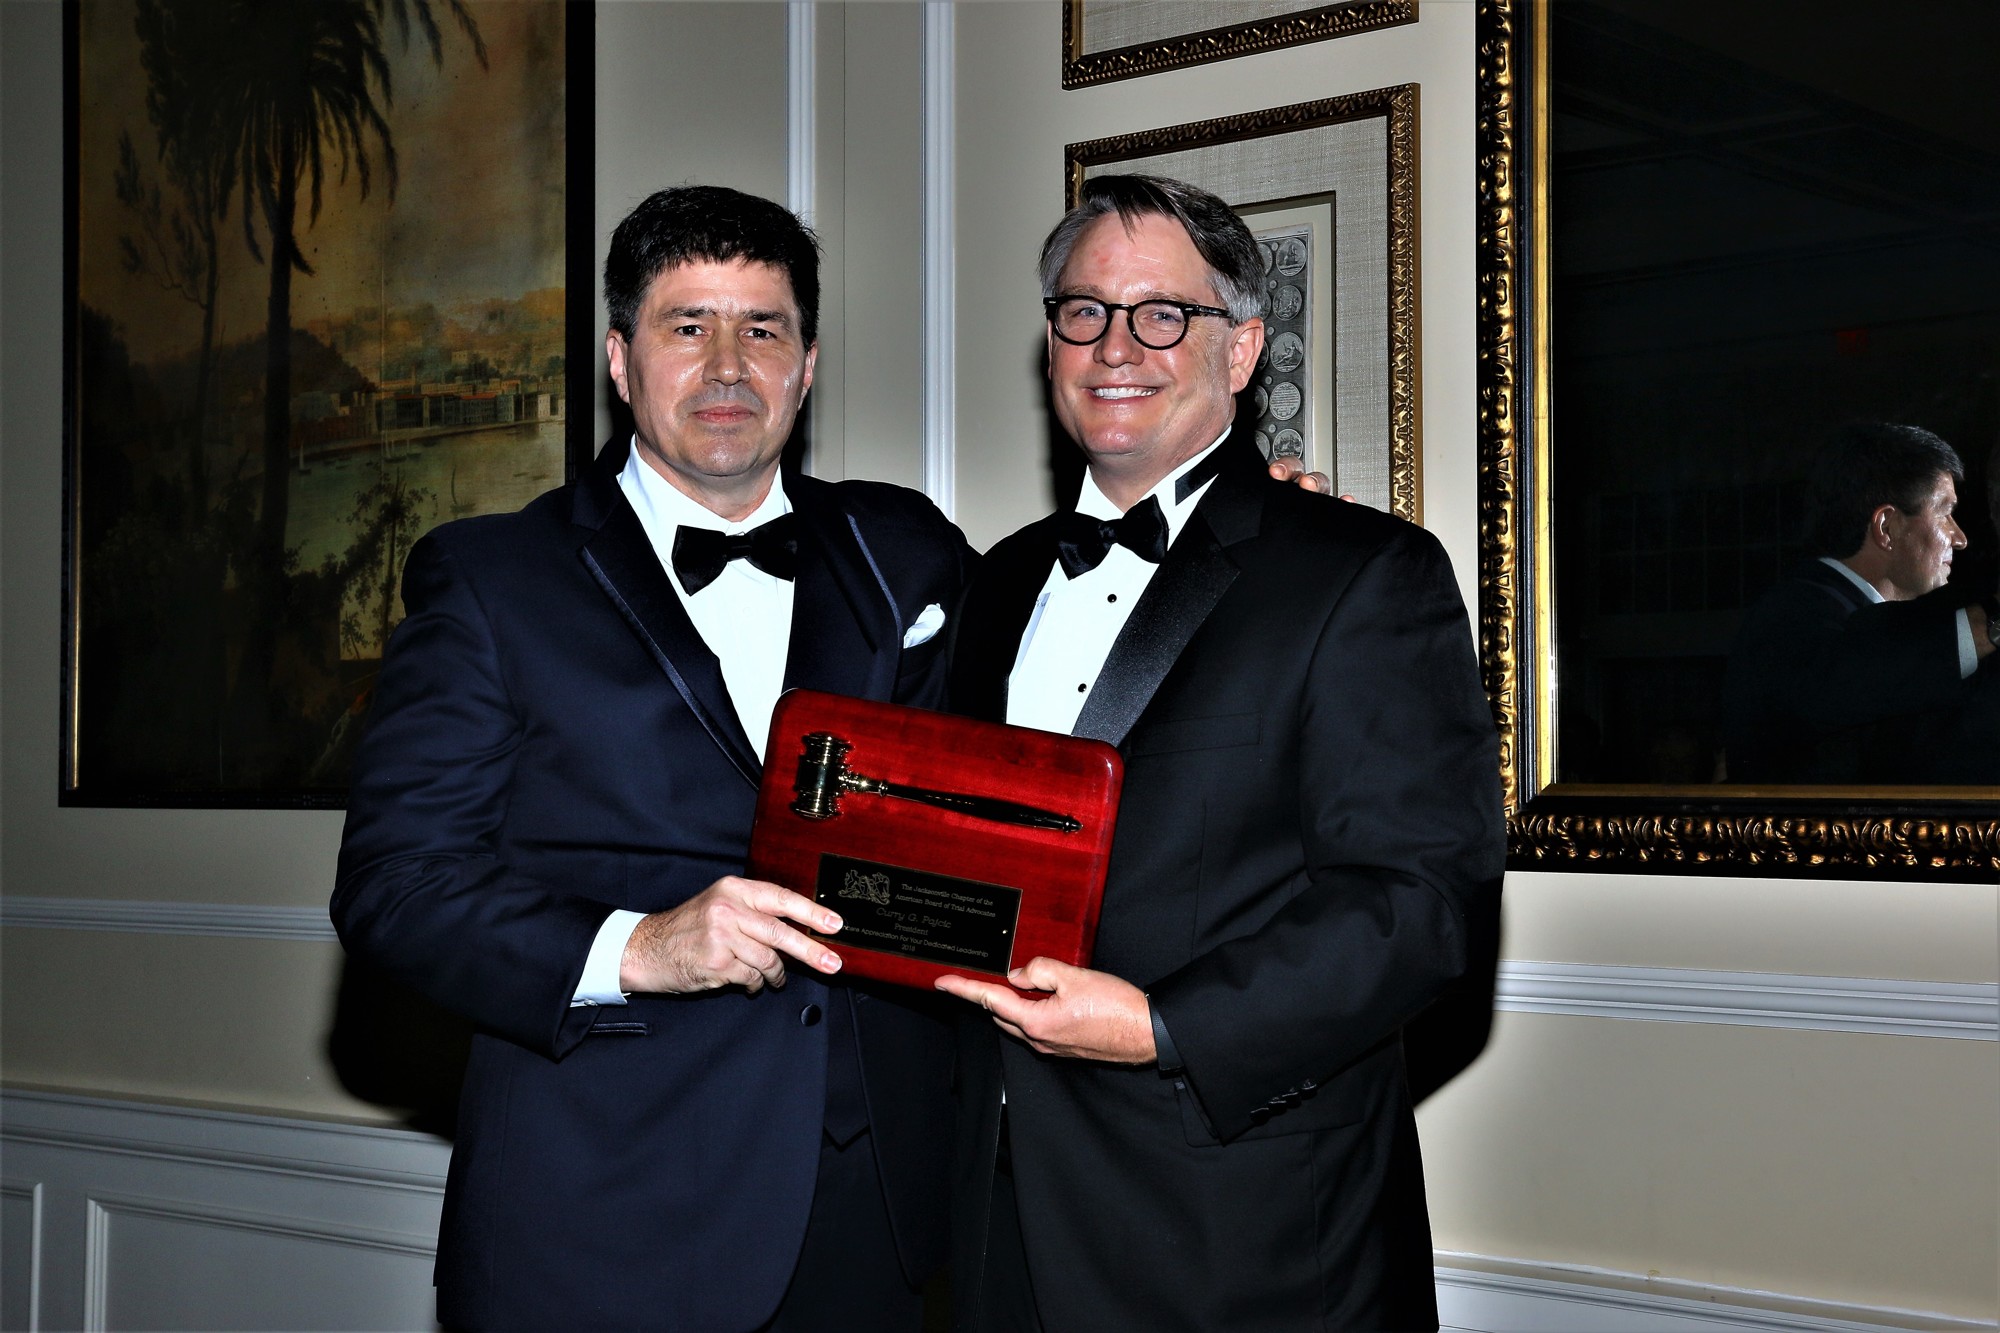 American Board of Trial Advocates Jacksonville Chapter 2019 President James D’Andrea, left, and 2018 President Curry Pajcic, who also was recognized as ABOTA’s Trial Lawyer of the Year.